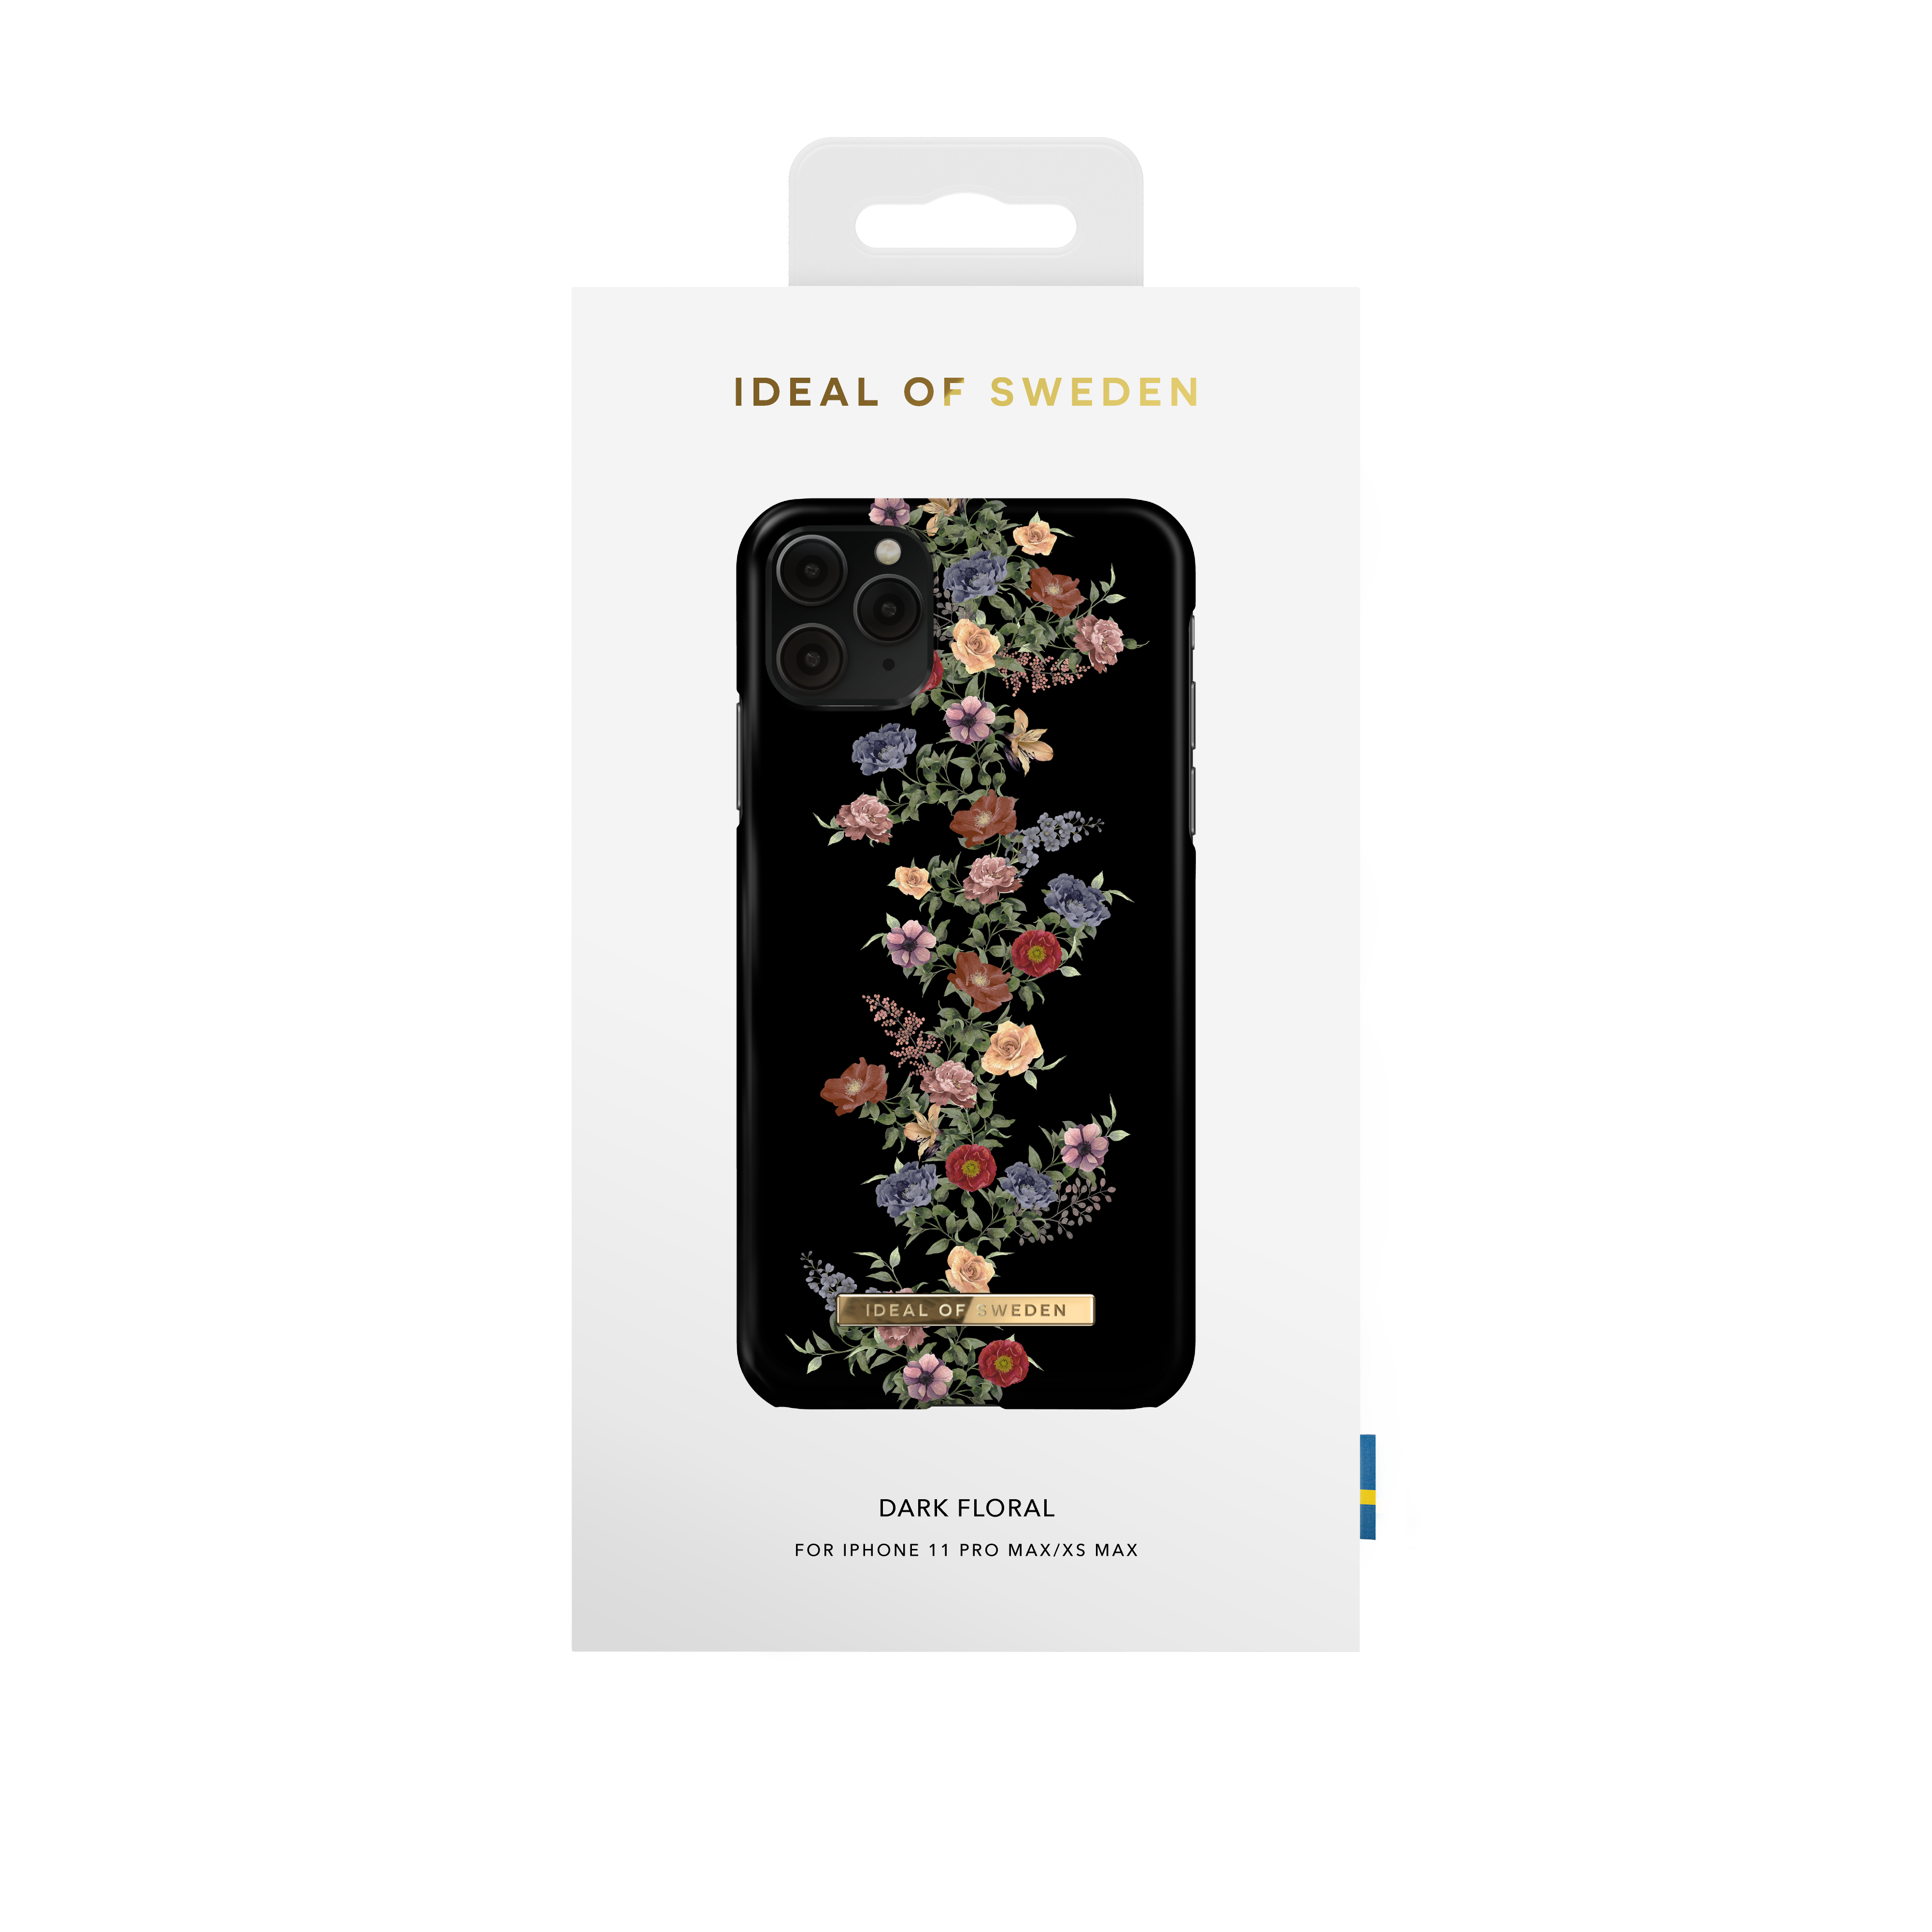 Max, SWEDEN 11 Pro iPhone IDFCAW18-I1965-97, OF IDEAL iPhone Dark XS Floral Apple, Backcover, Max,